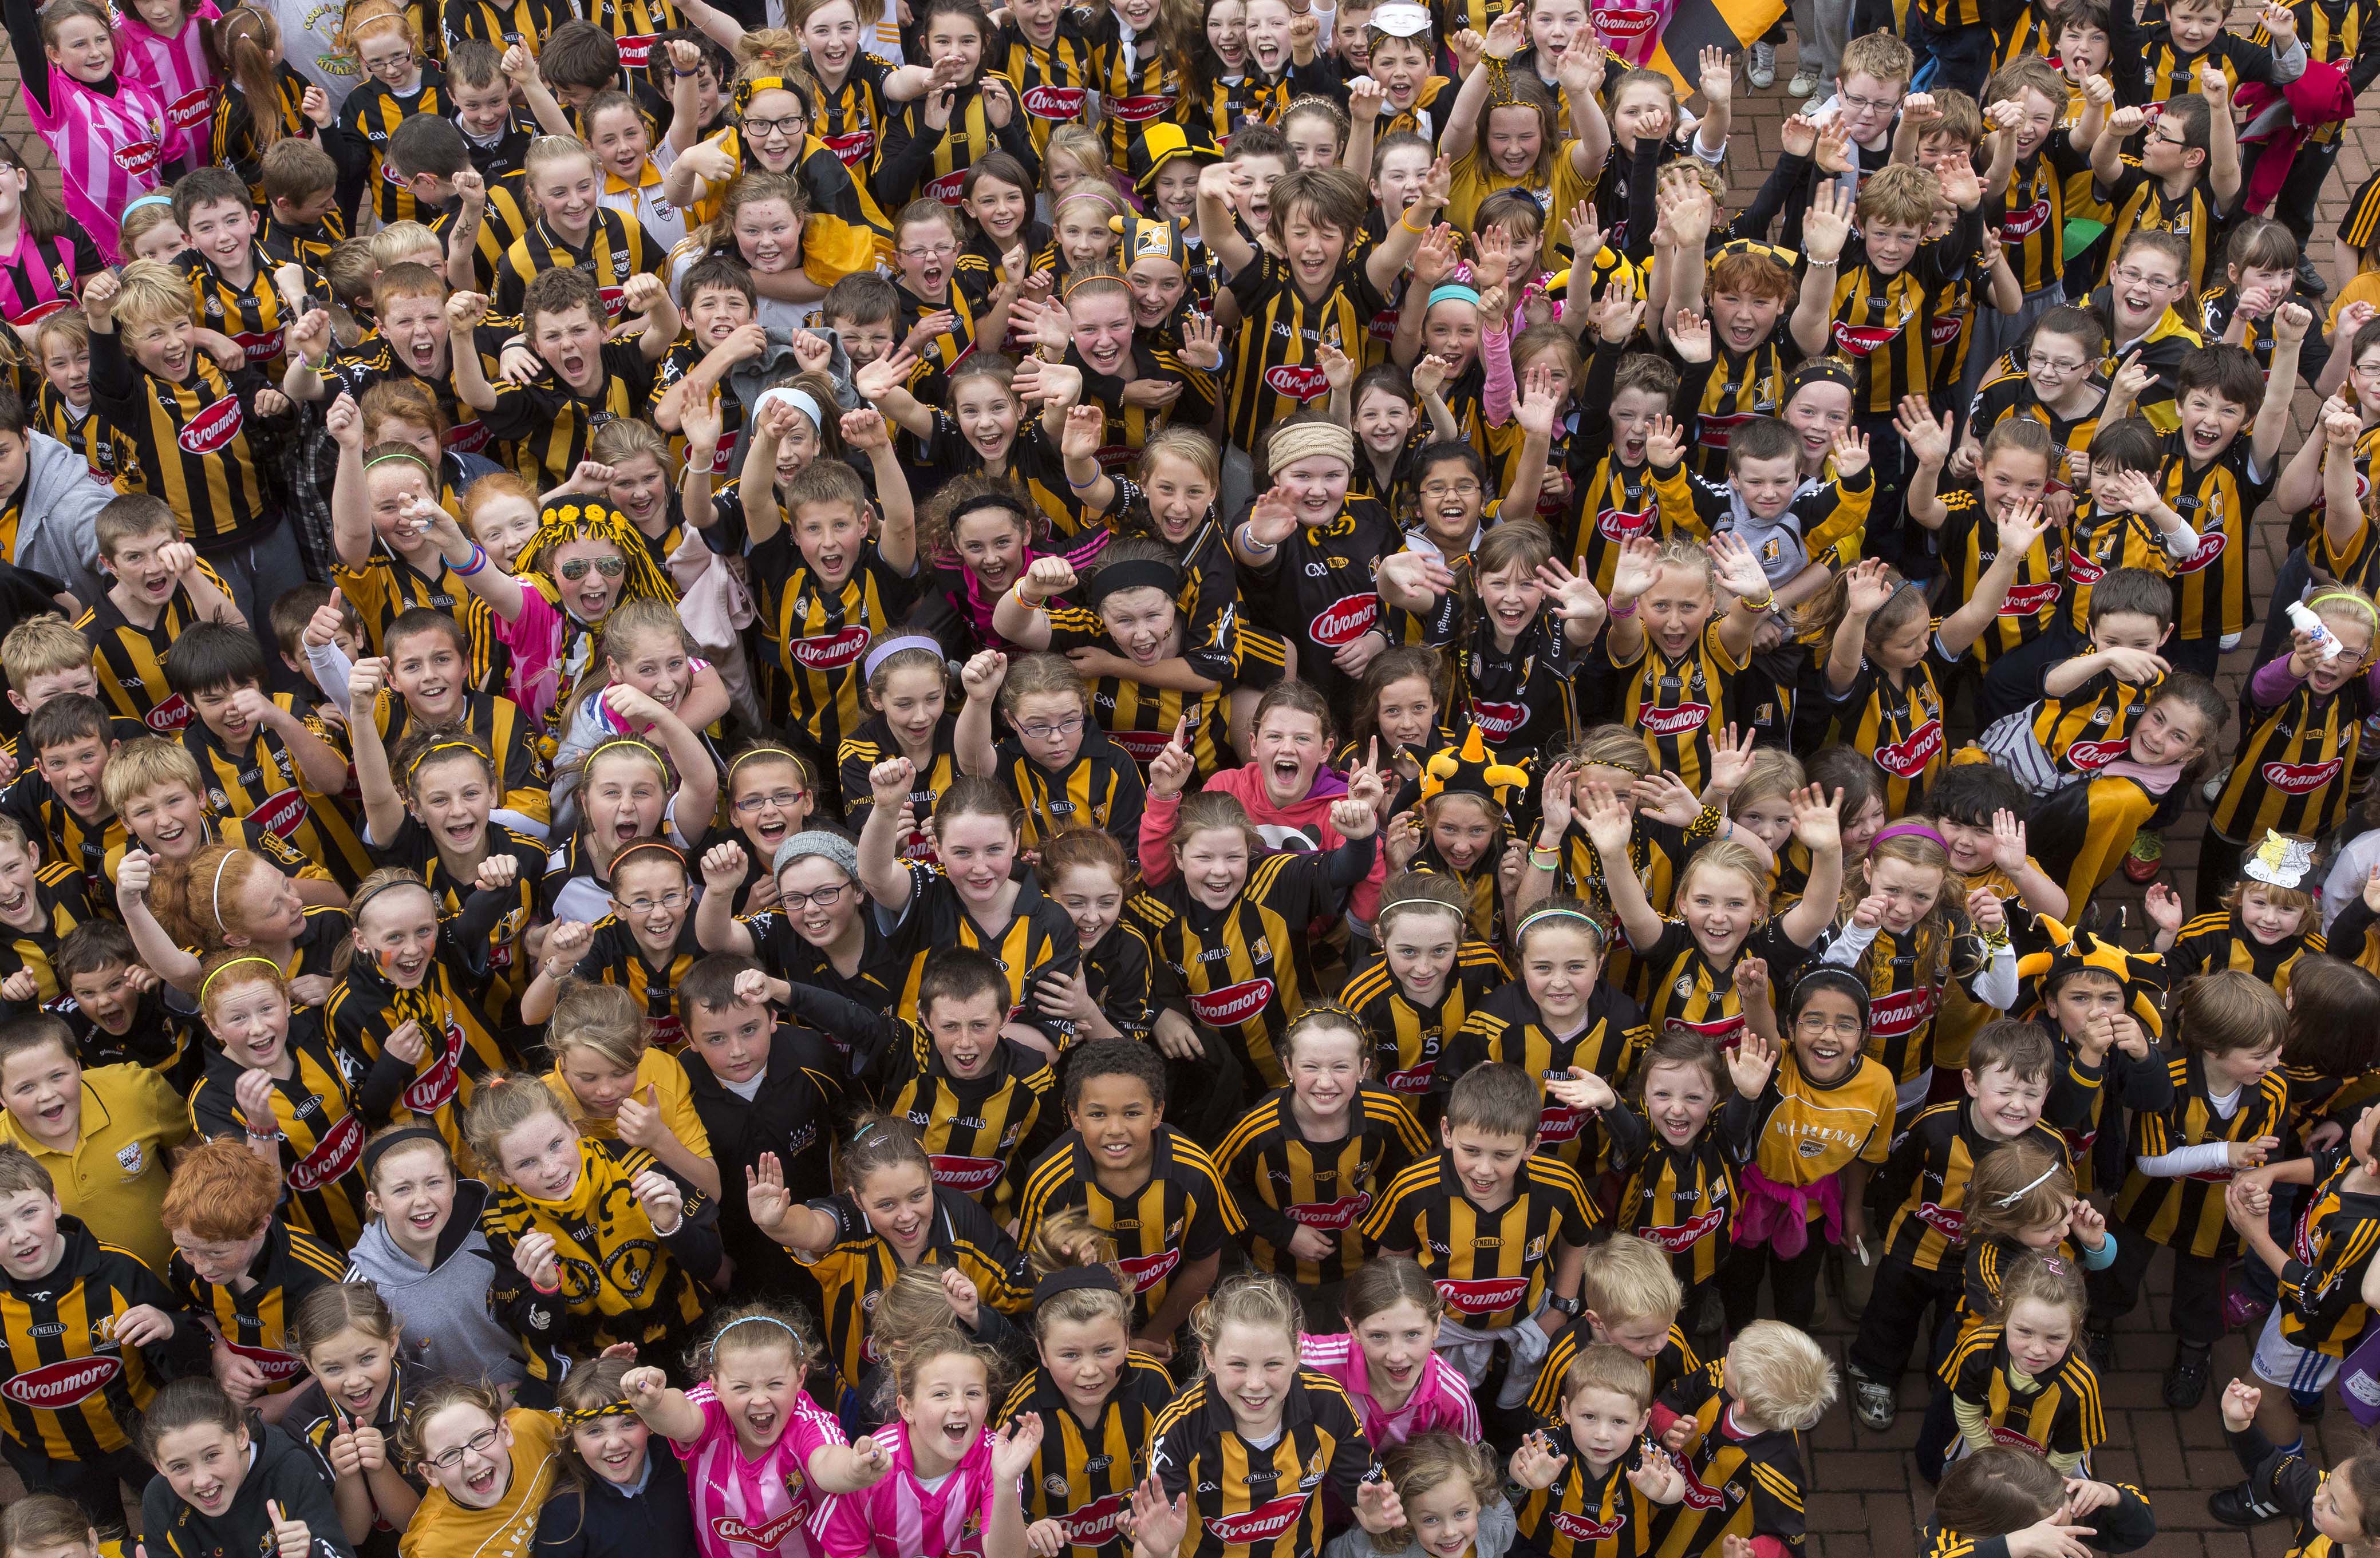 28/9/2012Pupils from St Marys National School in Thomastown Co Kilkenny pictured showing their support for the Kilkenny team ahead of this weekends All Ireland Hurling Final replay against Galway.Picture Dylan Vaughan